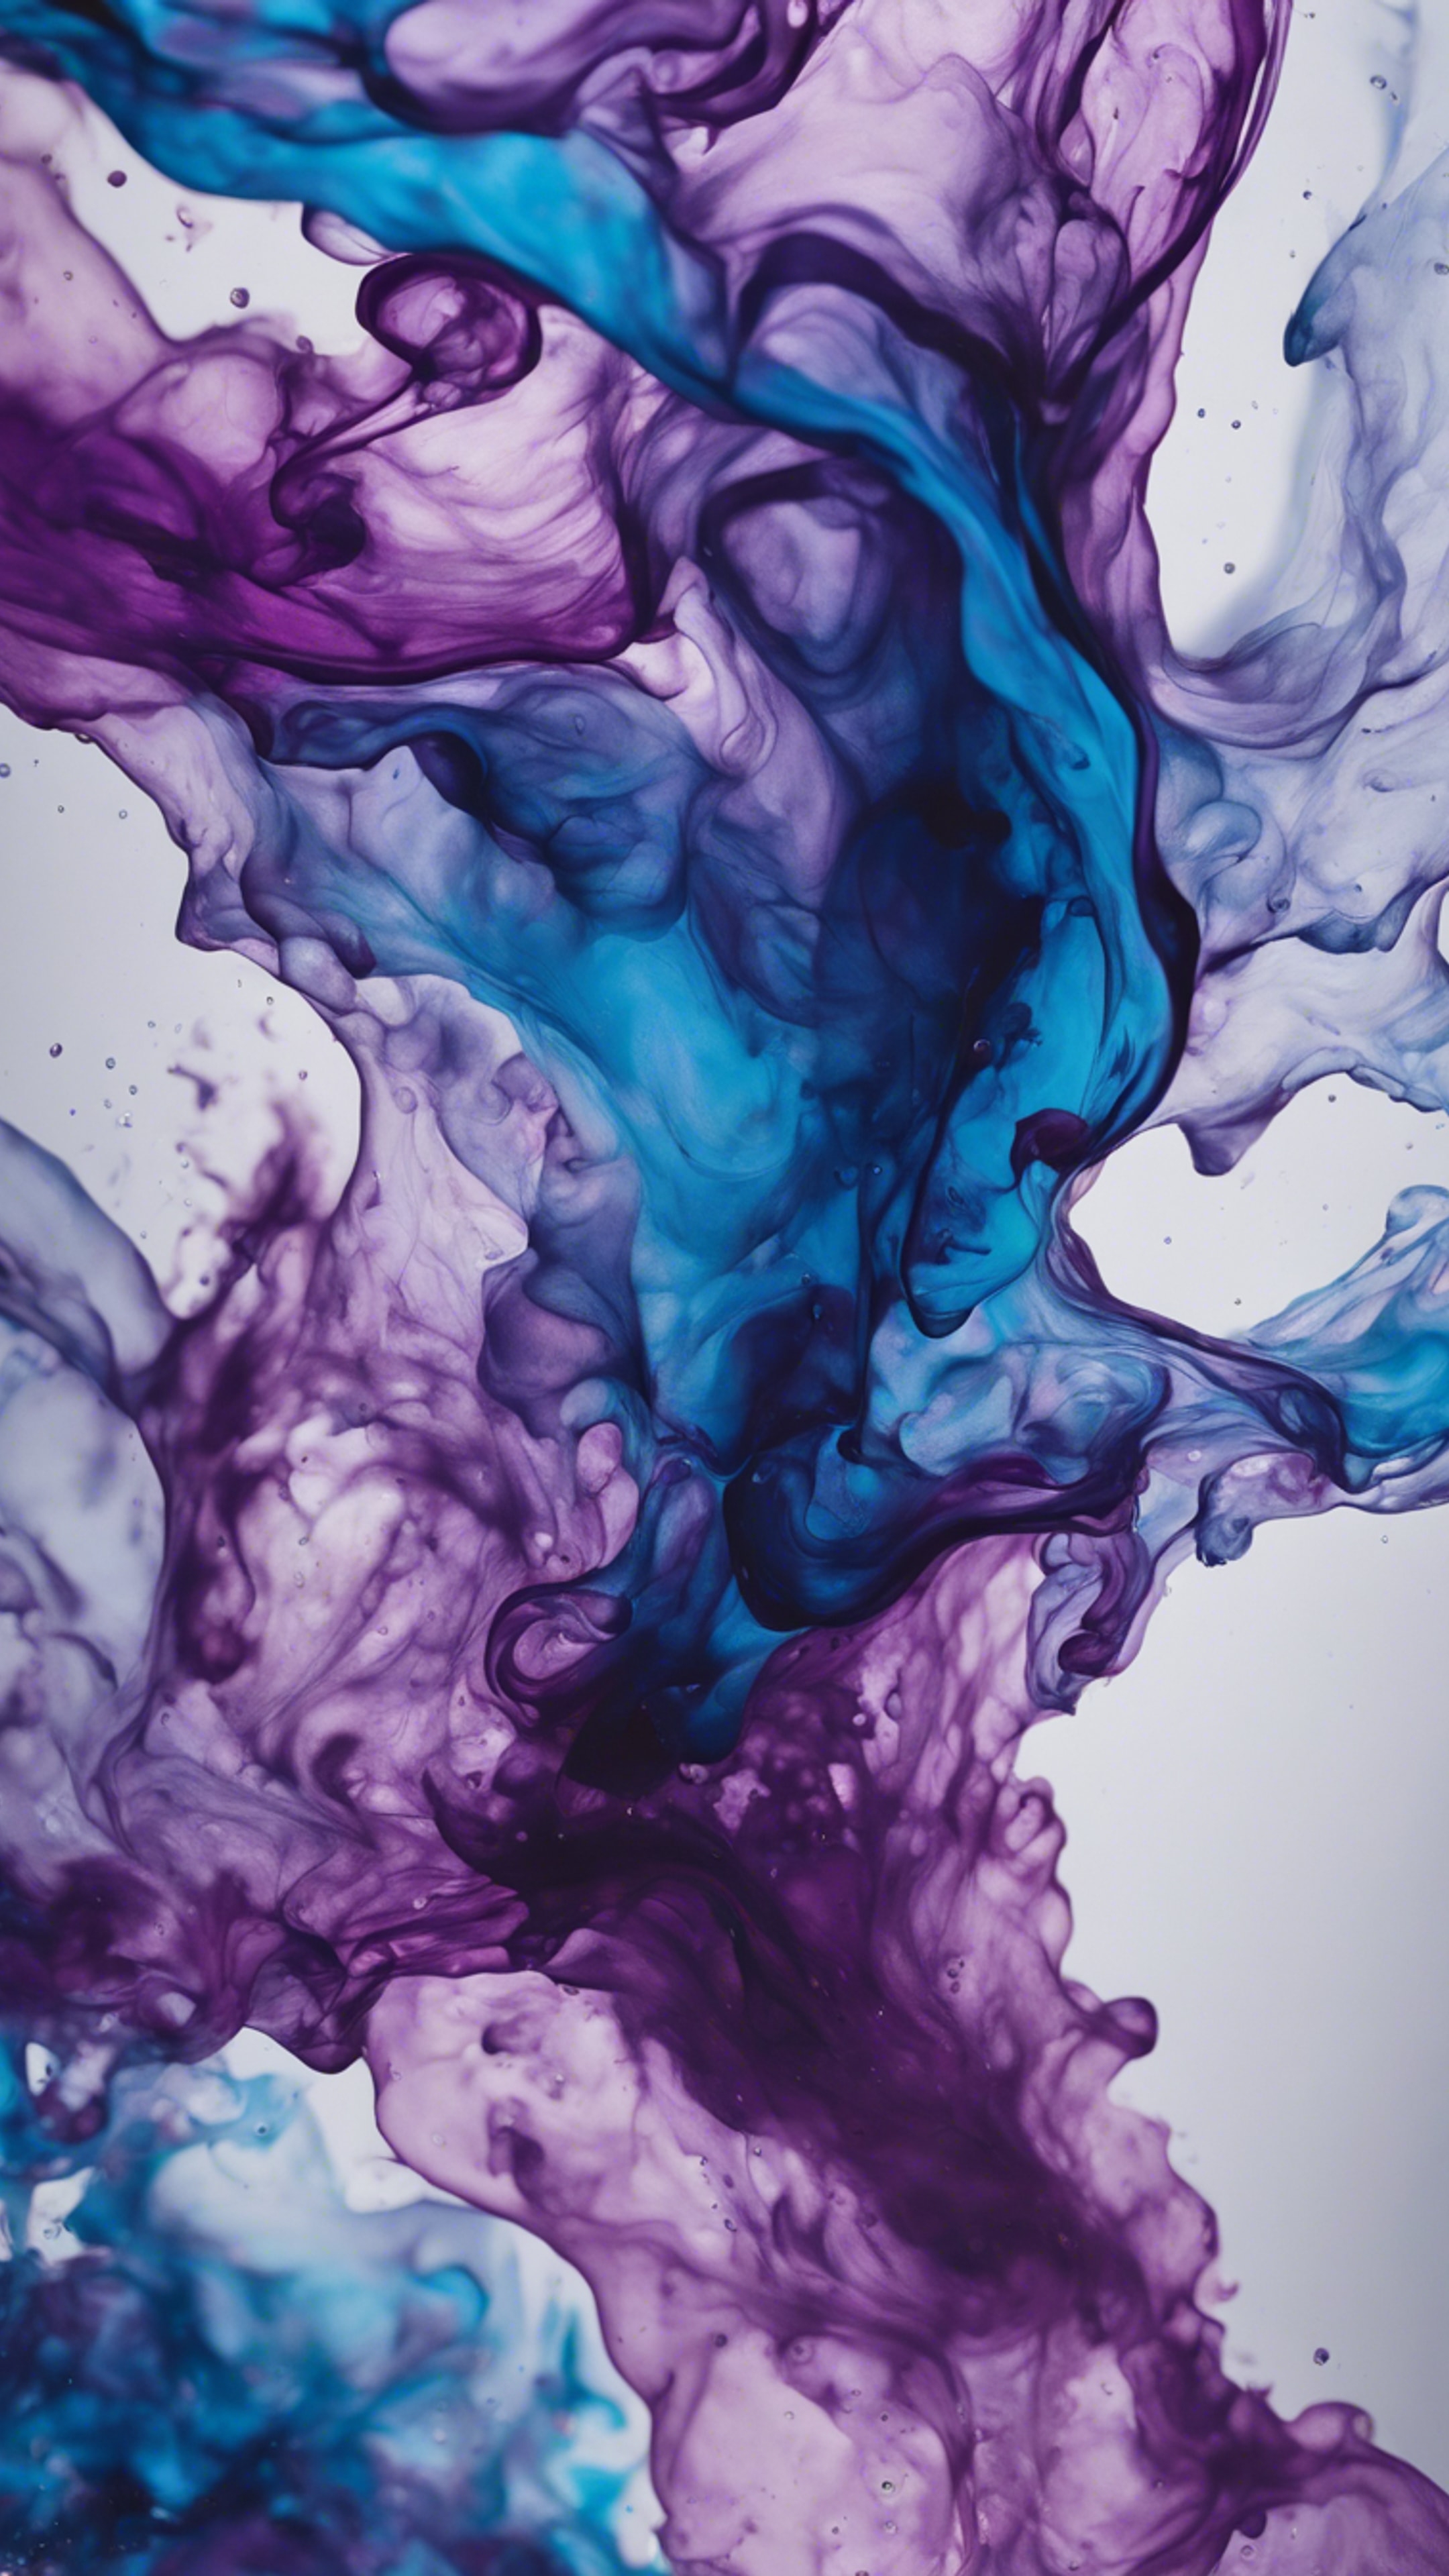 An abstract fluid art piece with swirling waves of ink in hues of cool blue and passionate purple. Papel de parede[1f0e9ffb93e84991a030]